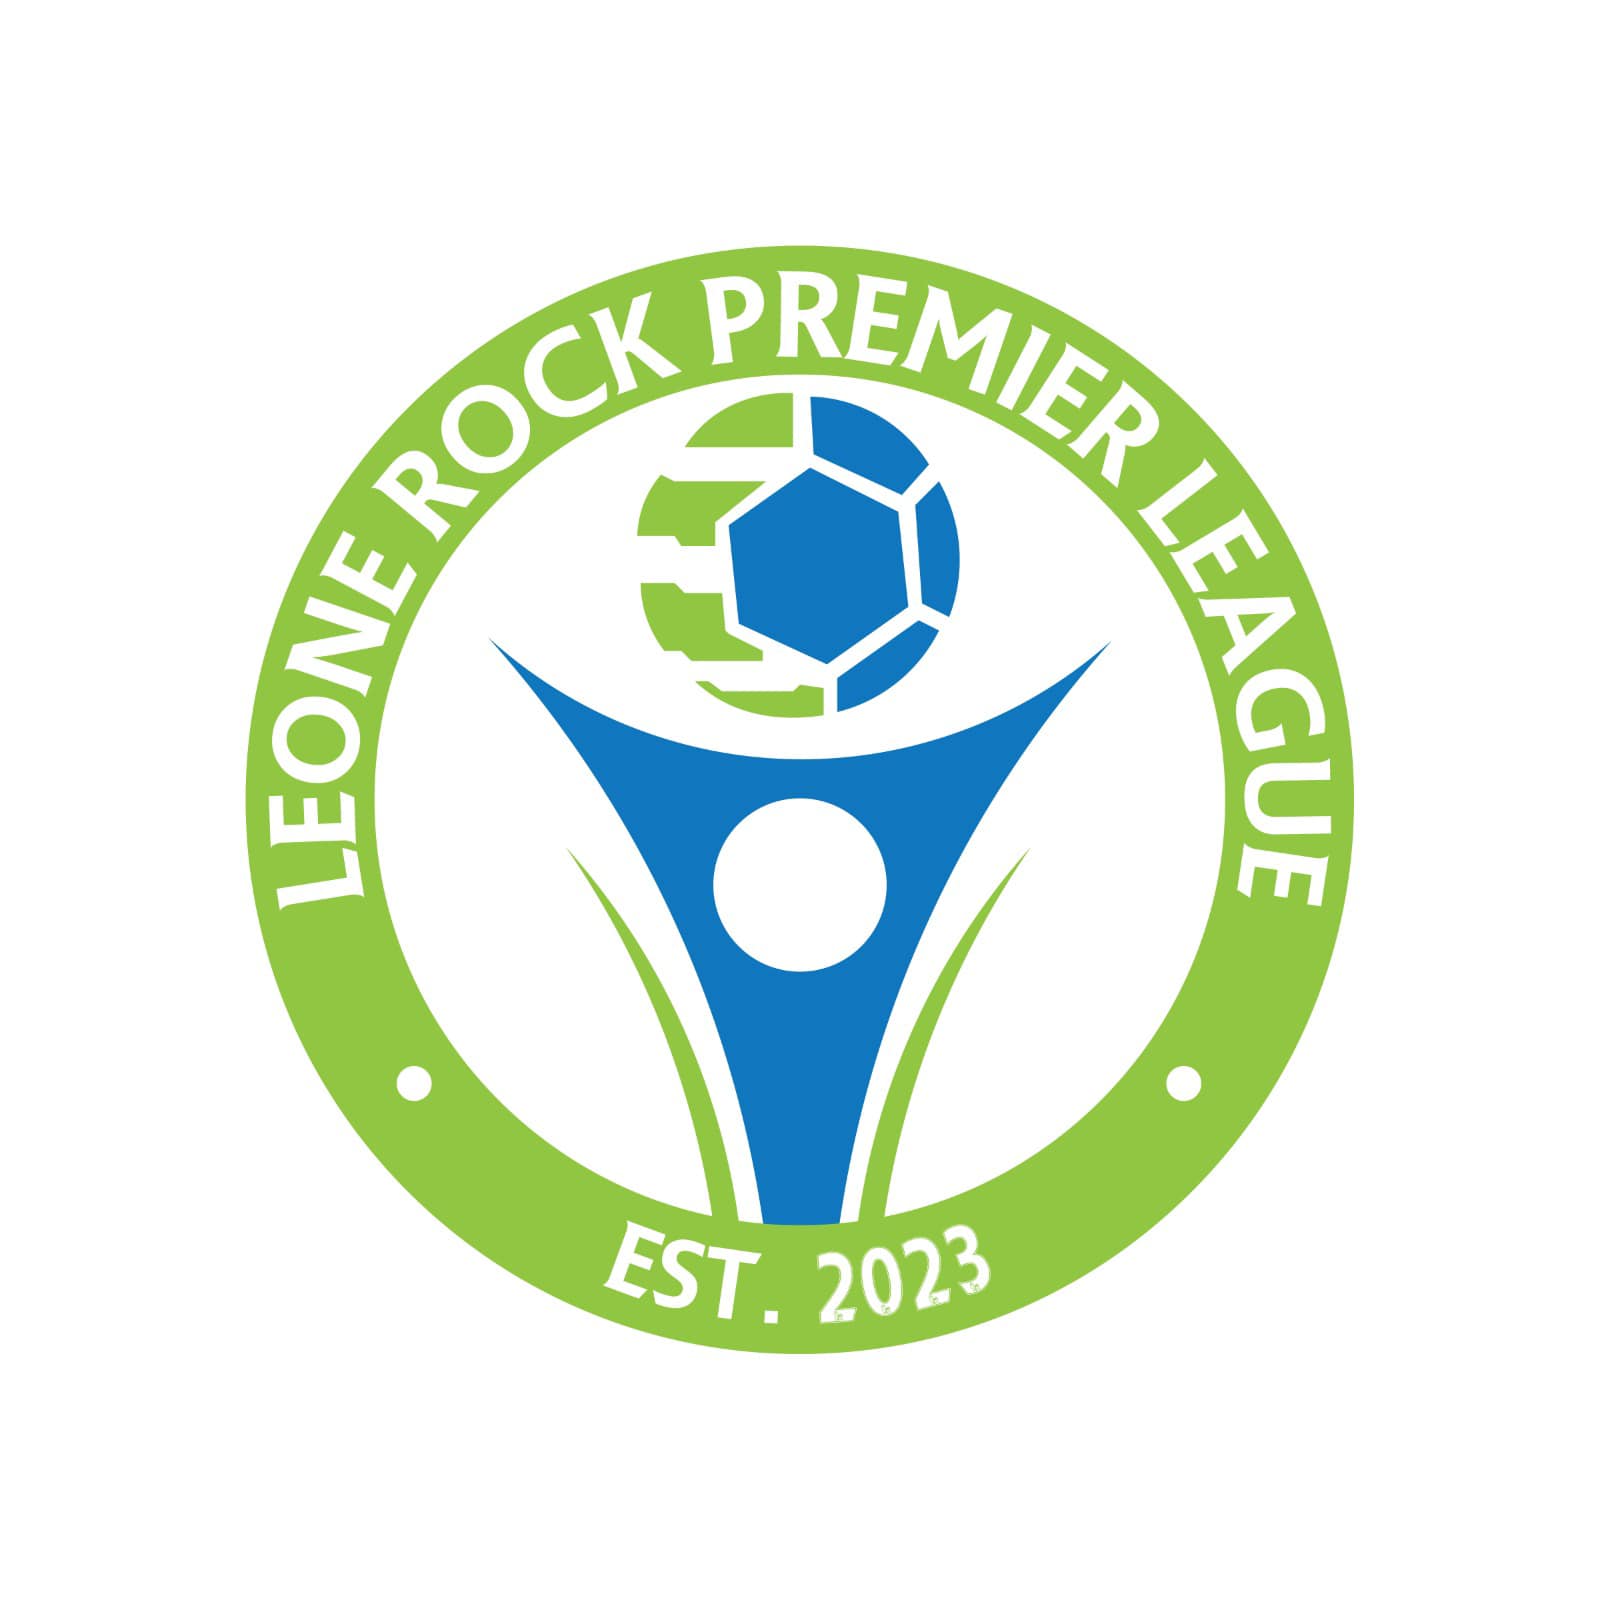 The League is now officially known as the Leone Rock Premier League for the 2023/2024 season